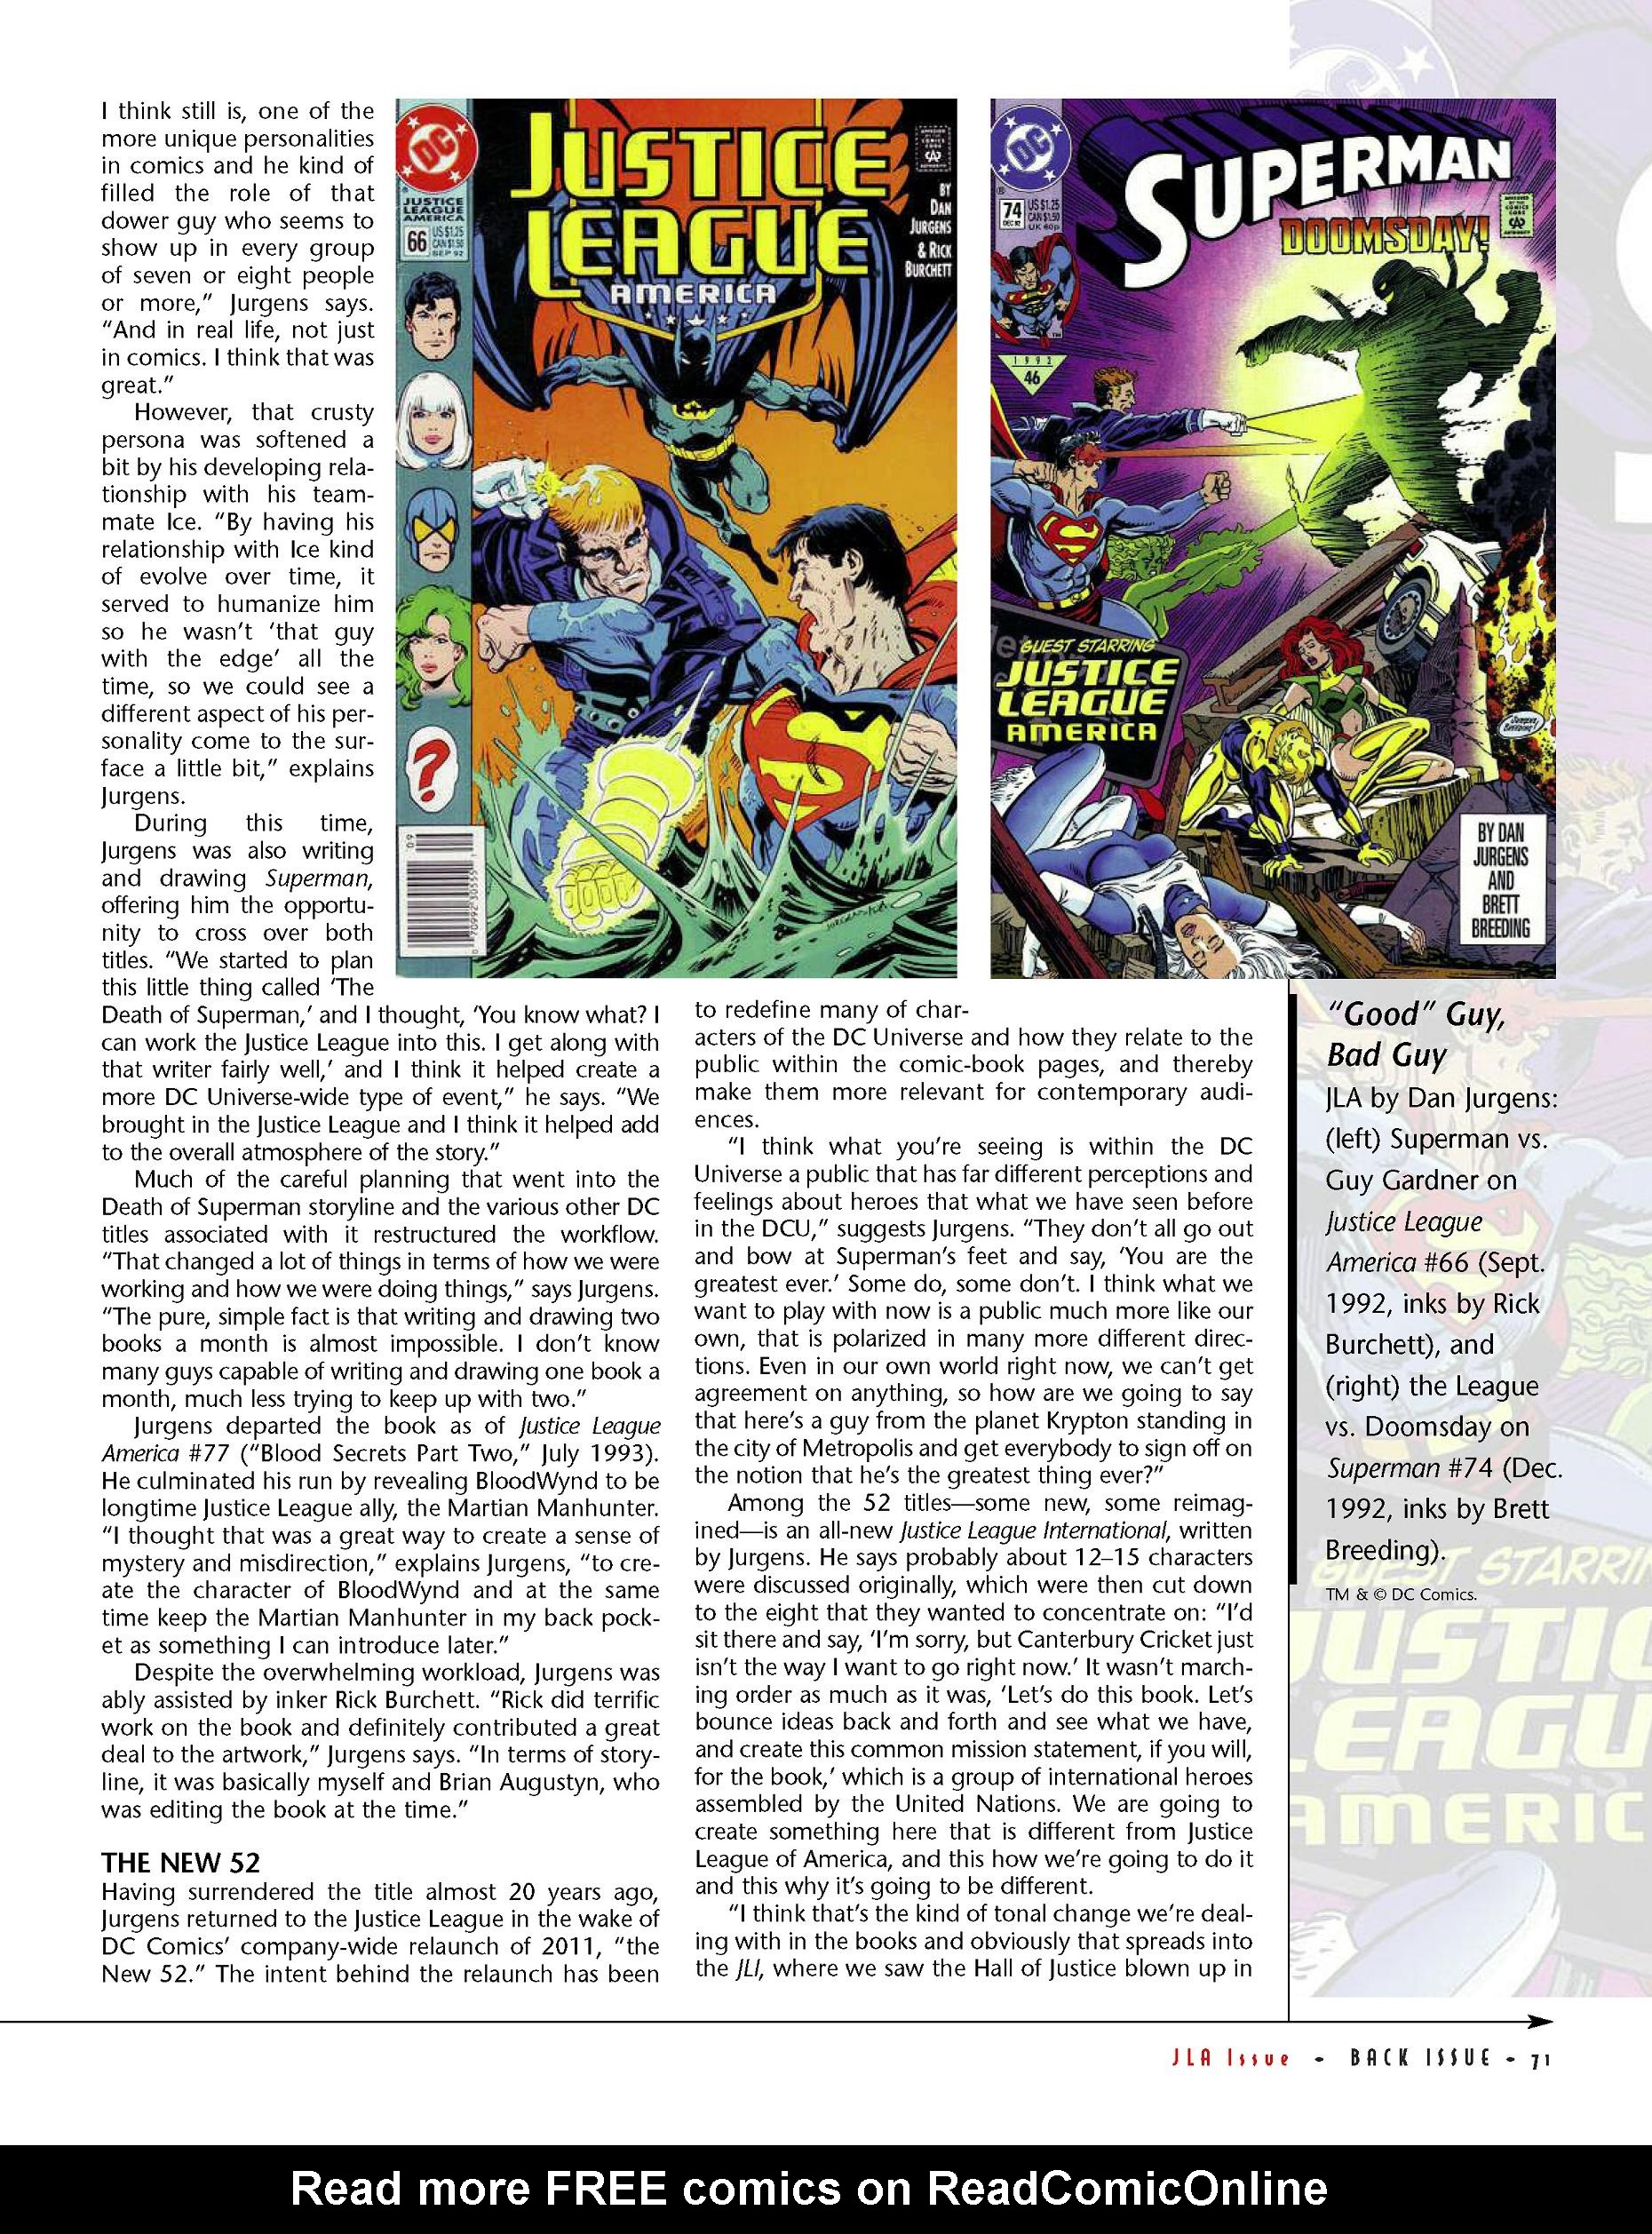 Read online Back Issue comic -  Issue #58 - 71